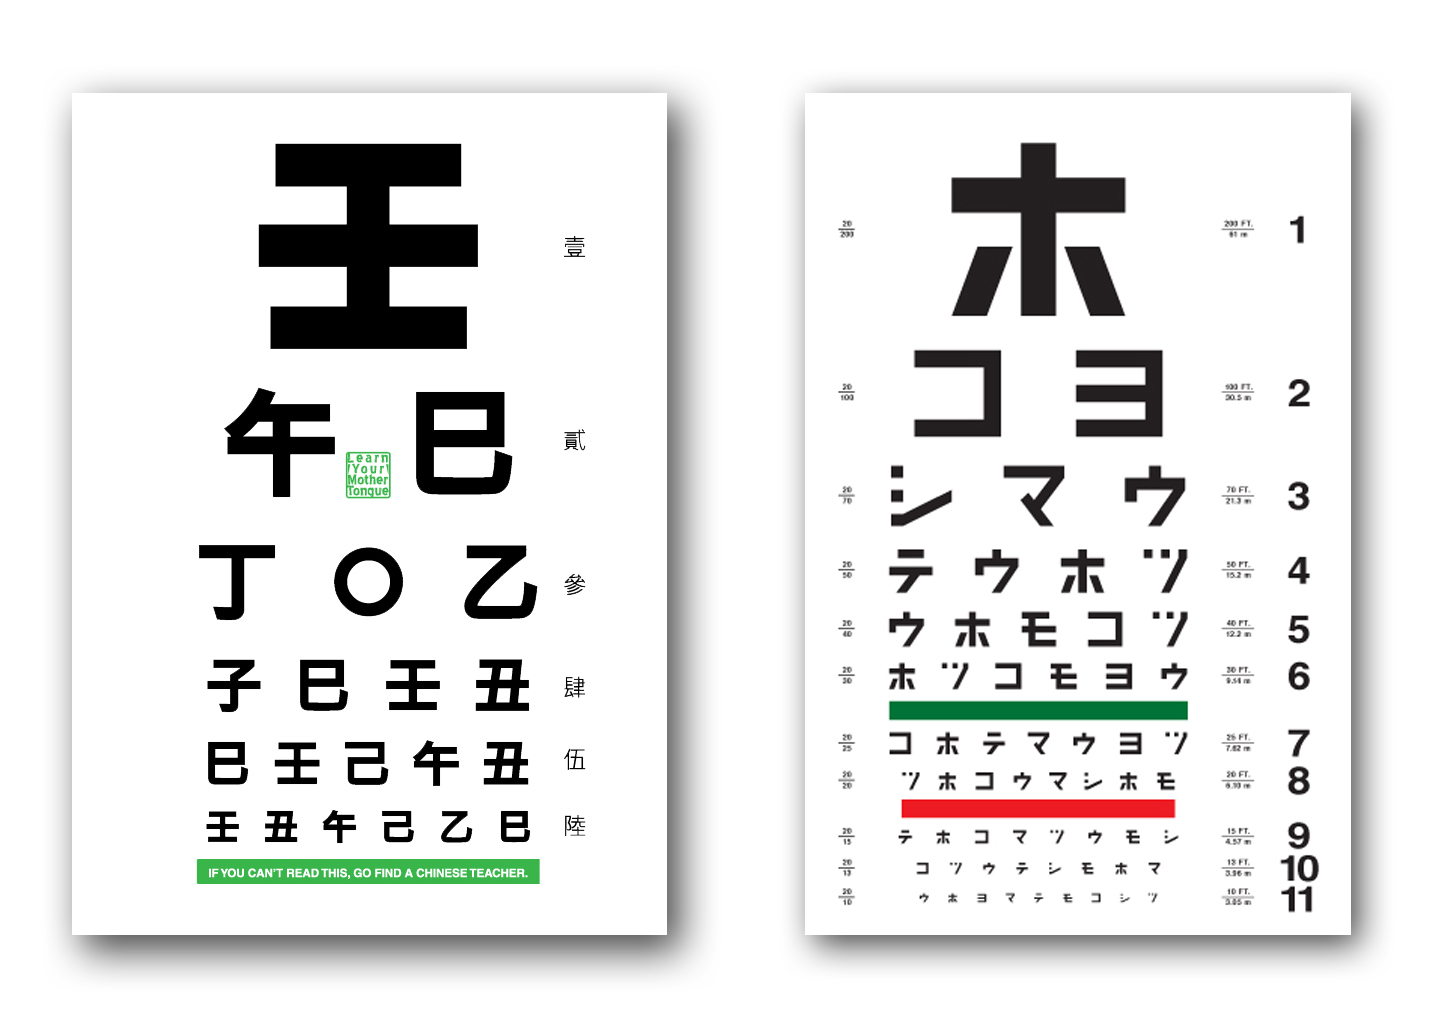 visual-acuity-test-issue-journal-of-business-design